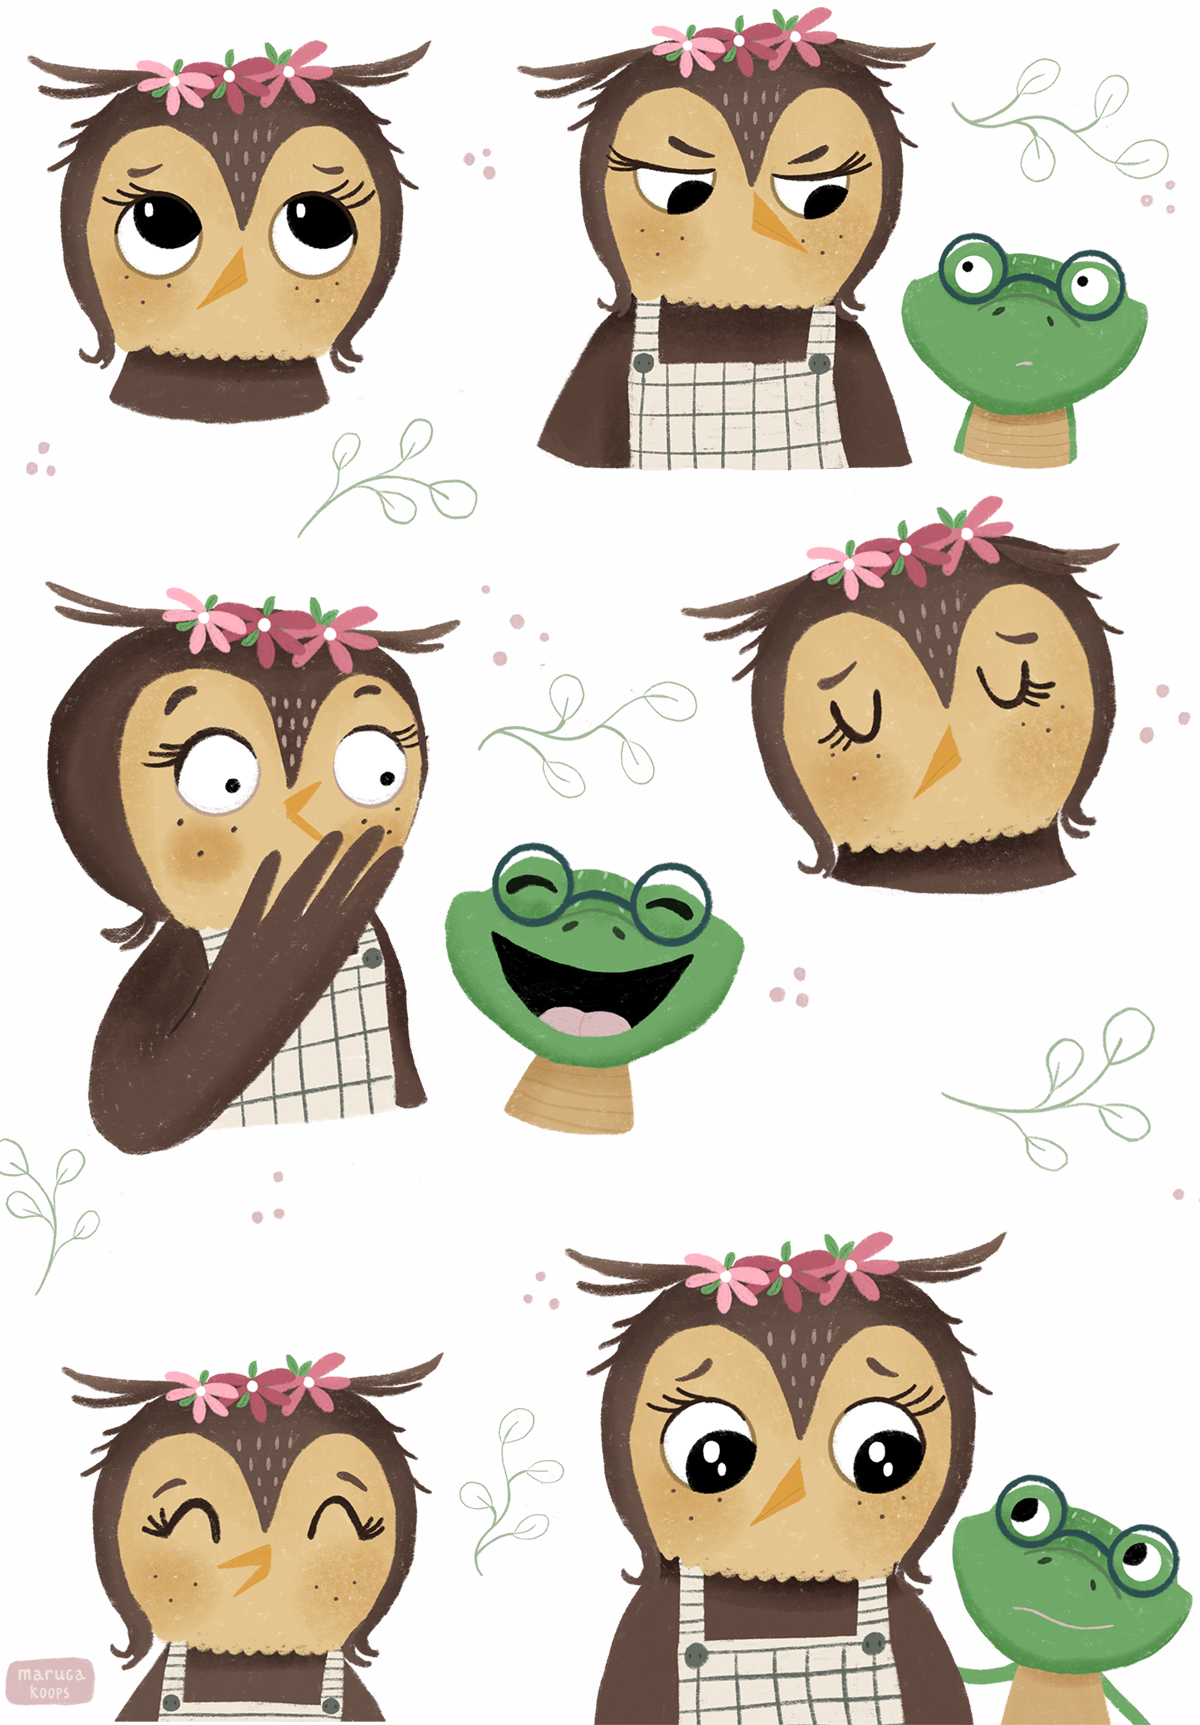 Owl and lizard with different emotions